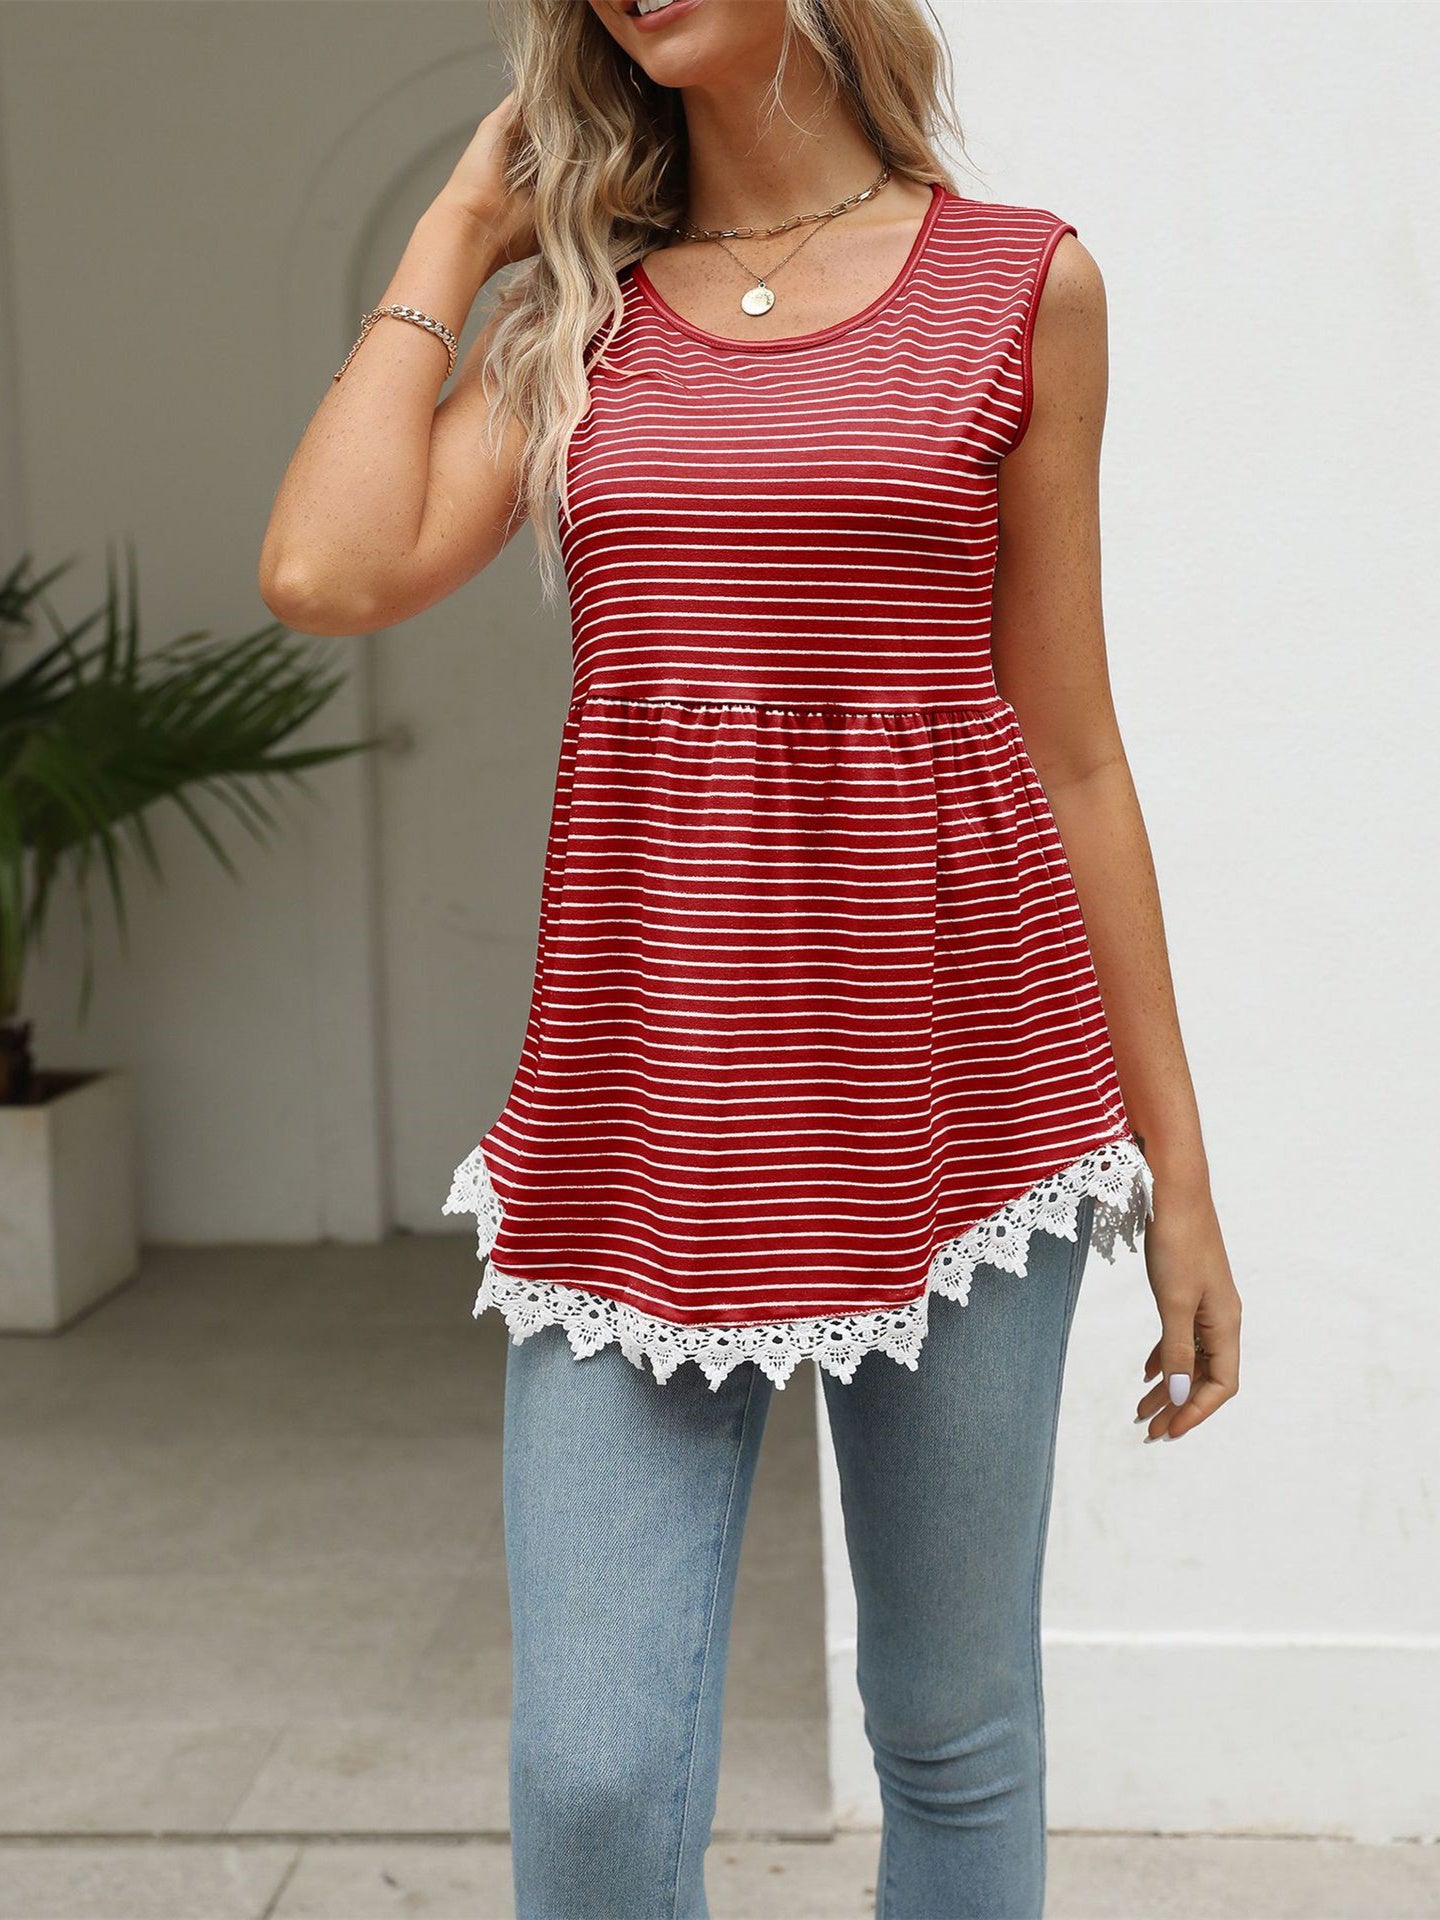 Women's Sleeveless Scoop Neck Striped Lace Top